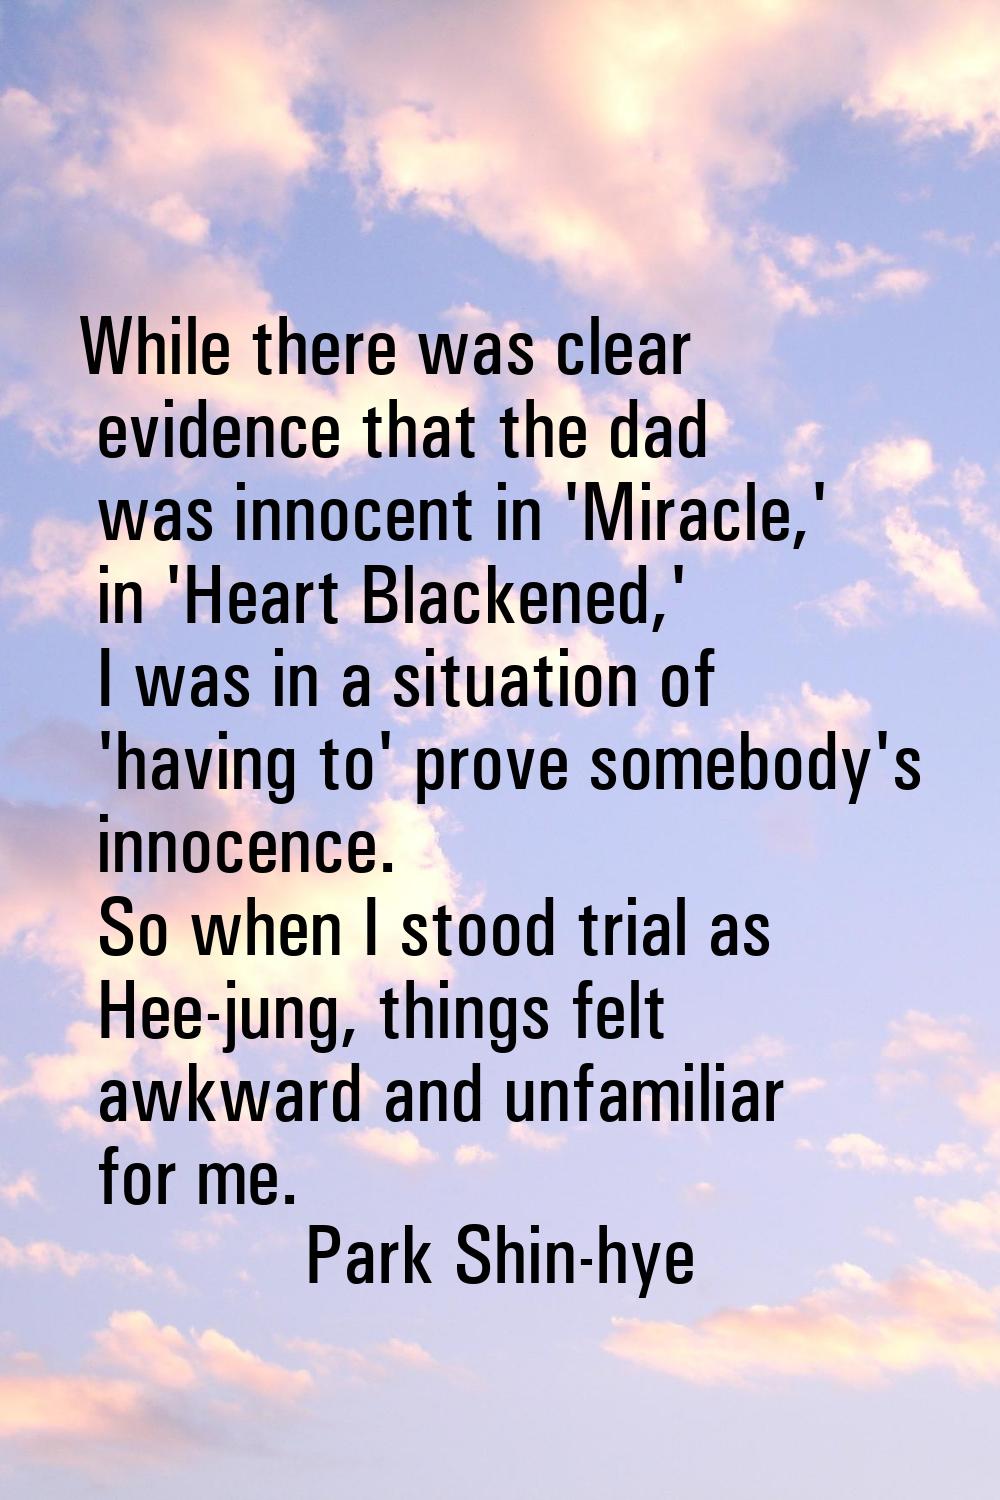 While there was clear evidence that the dad was innocent in 'Miracle,' in 'Heart Blackened,' I was 